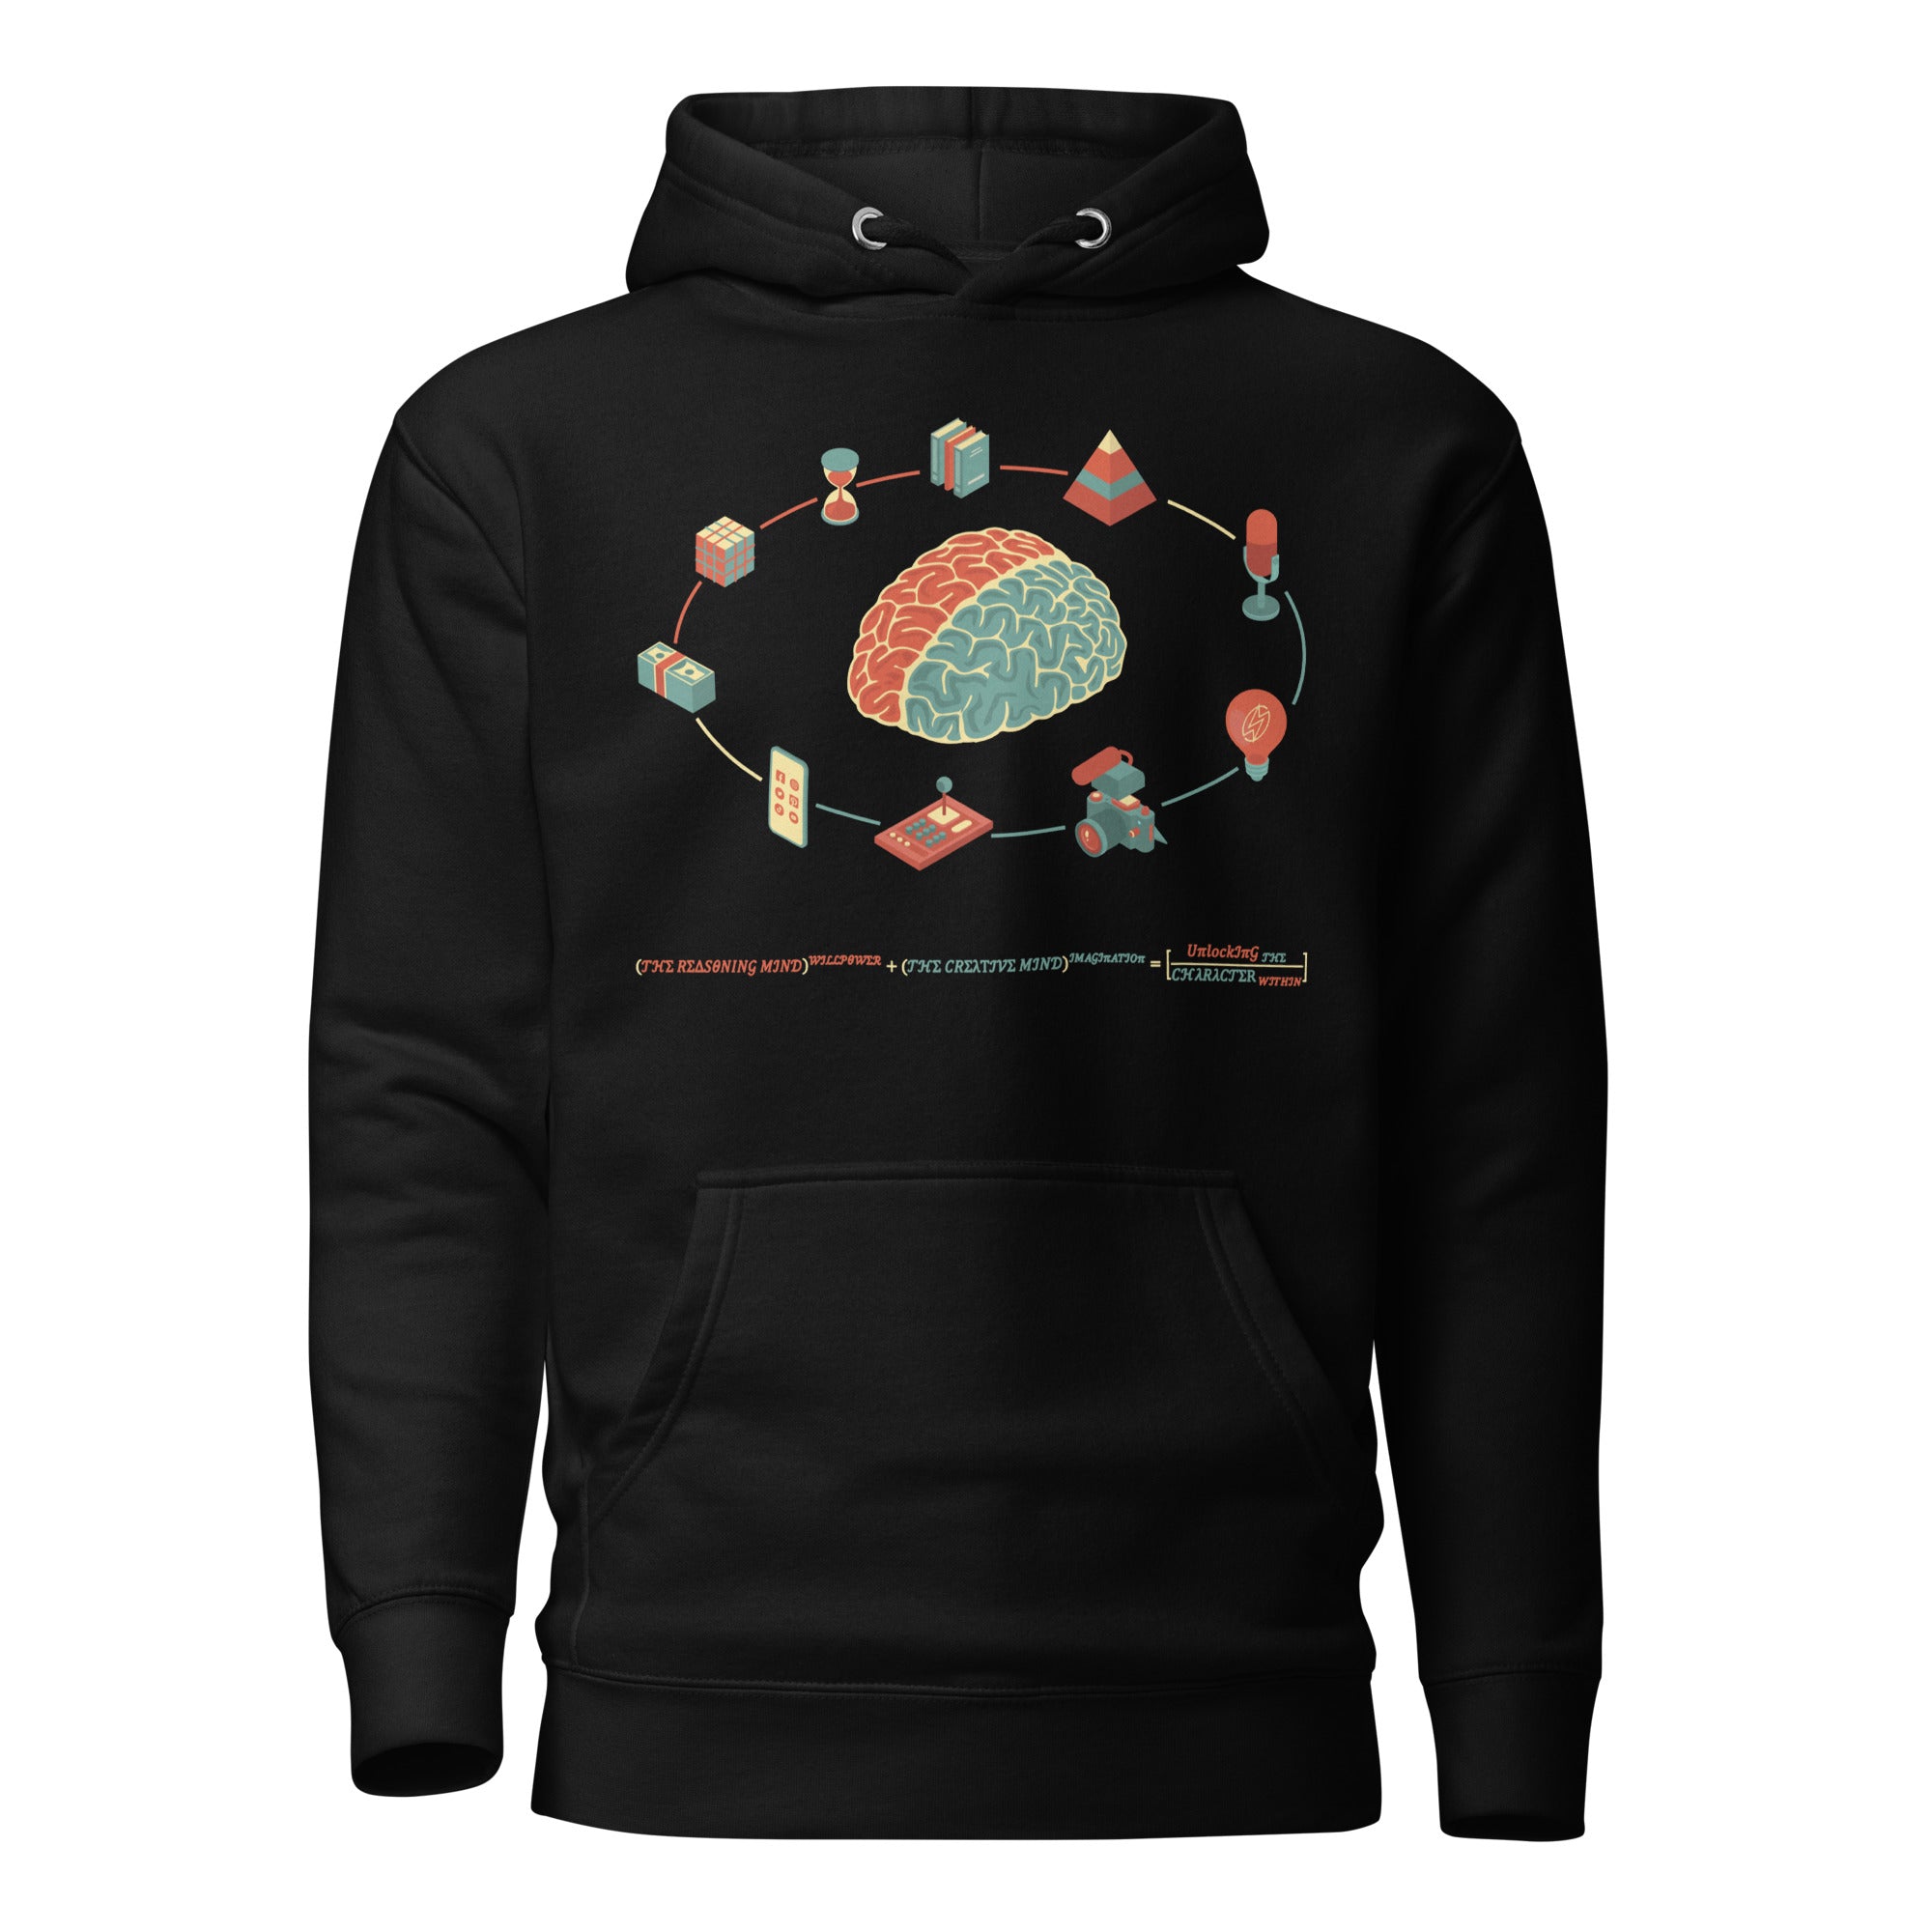 Two Minds Aligned - Unisex Hoodie